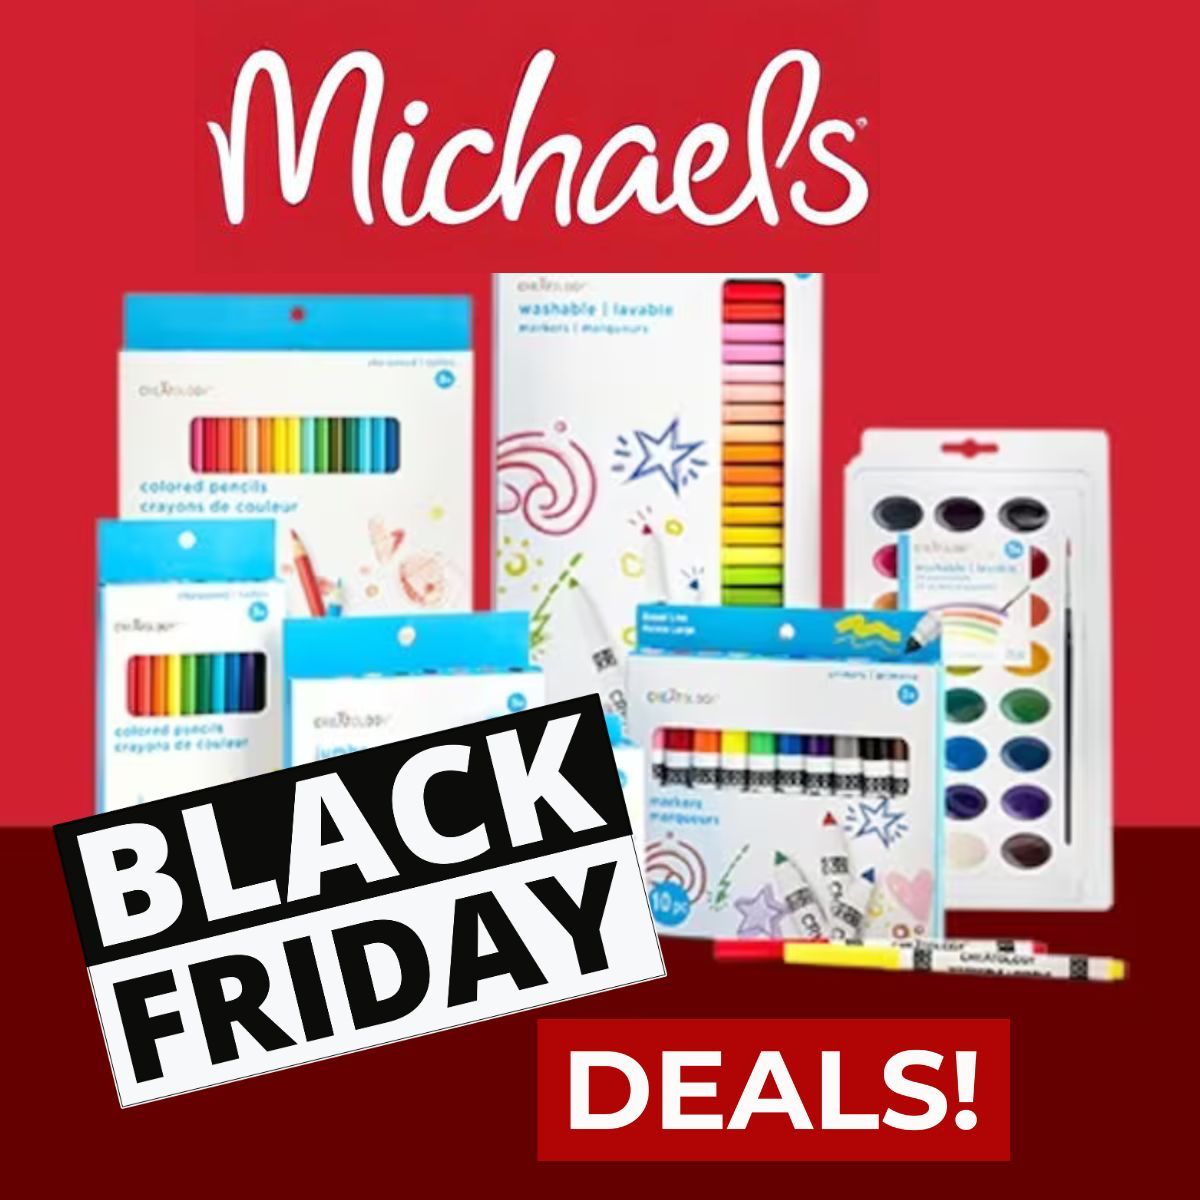 Michaels Black Friday Featured Image